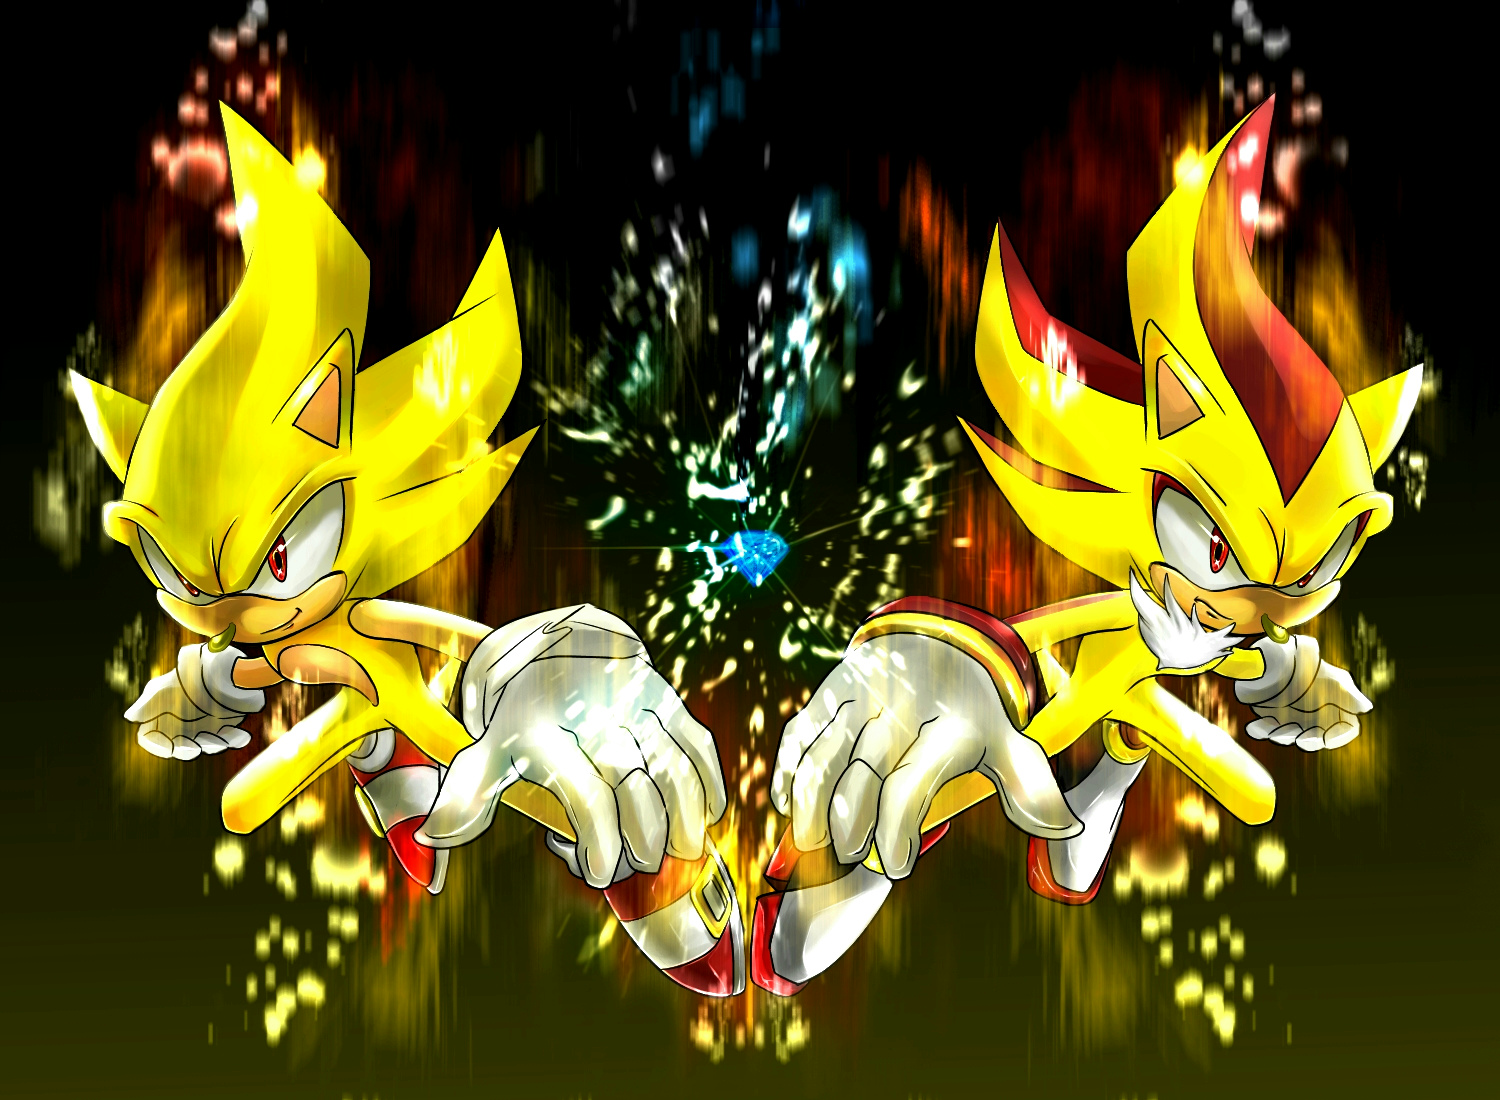 Super sonic and super shadow by ka